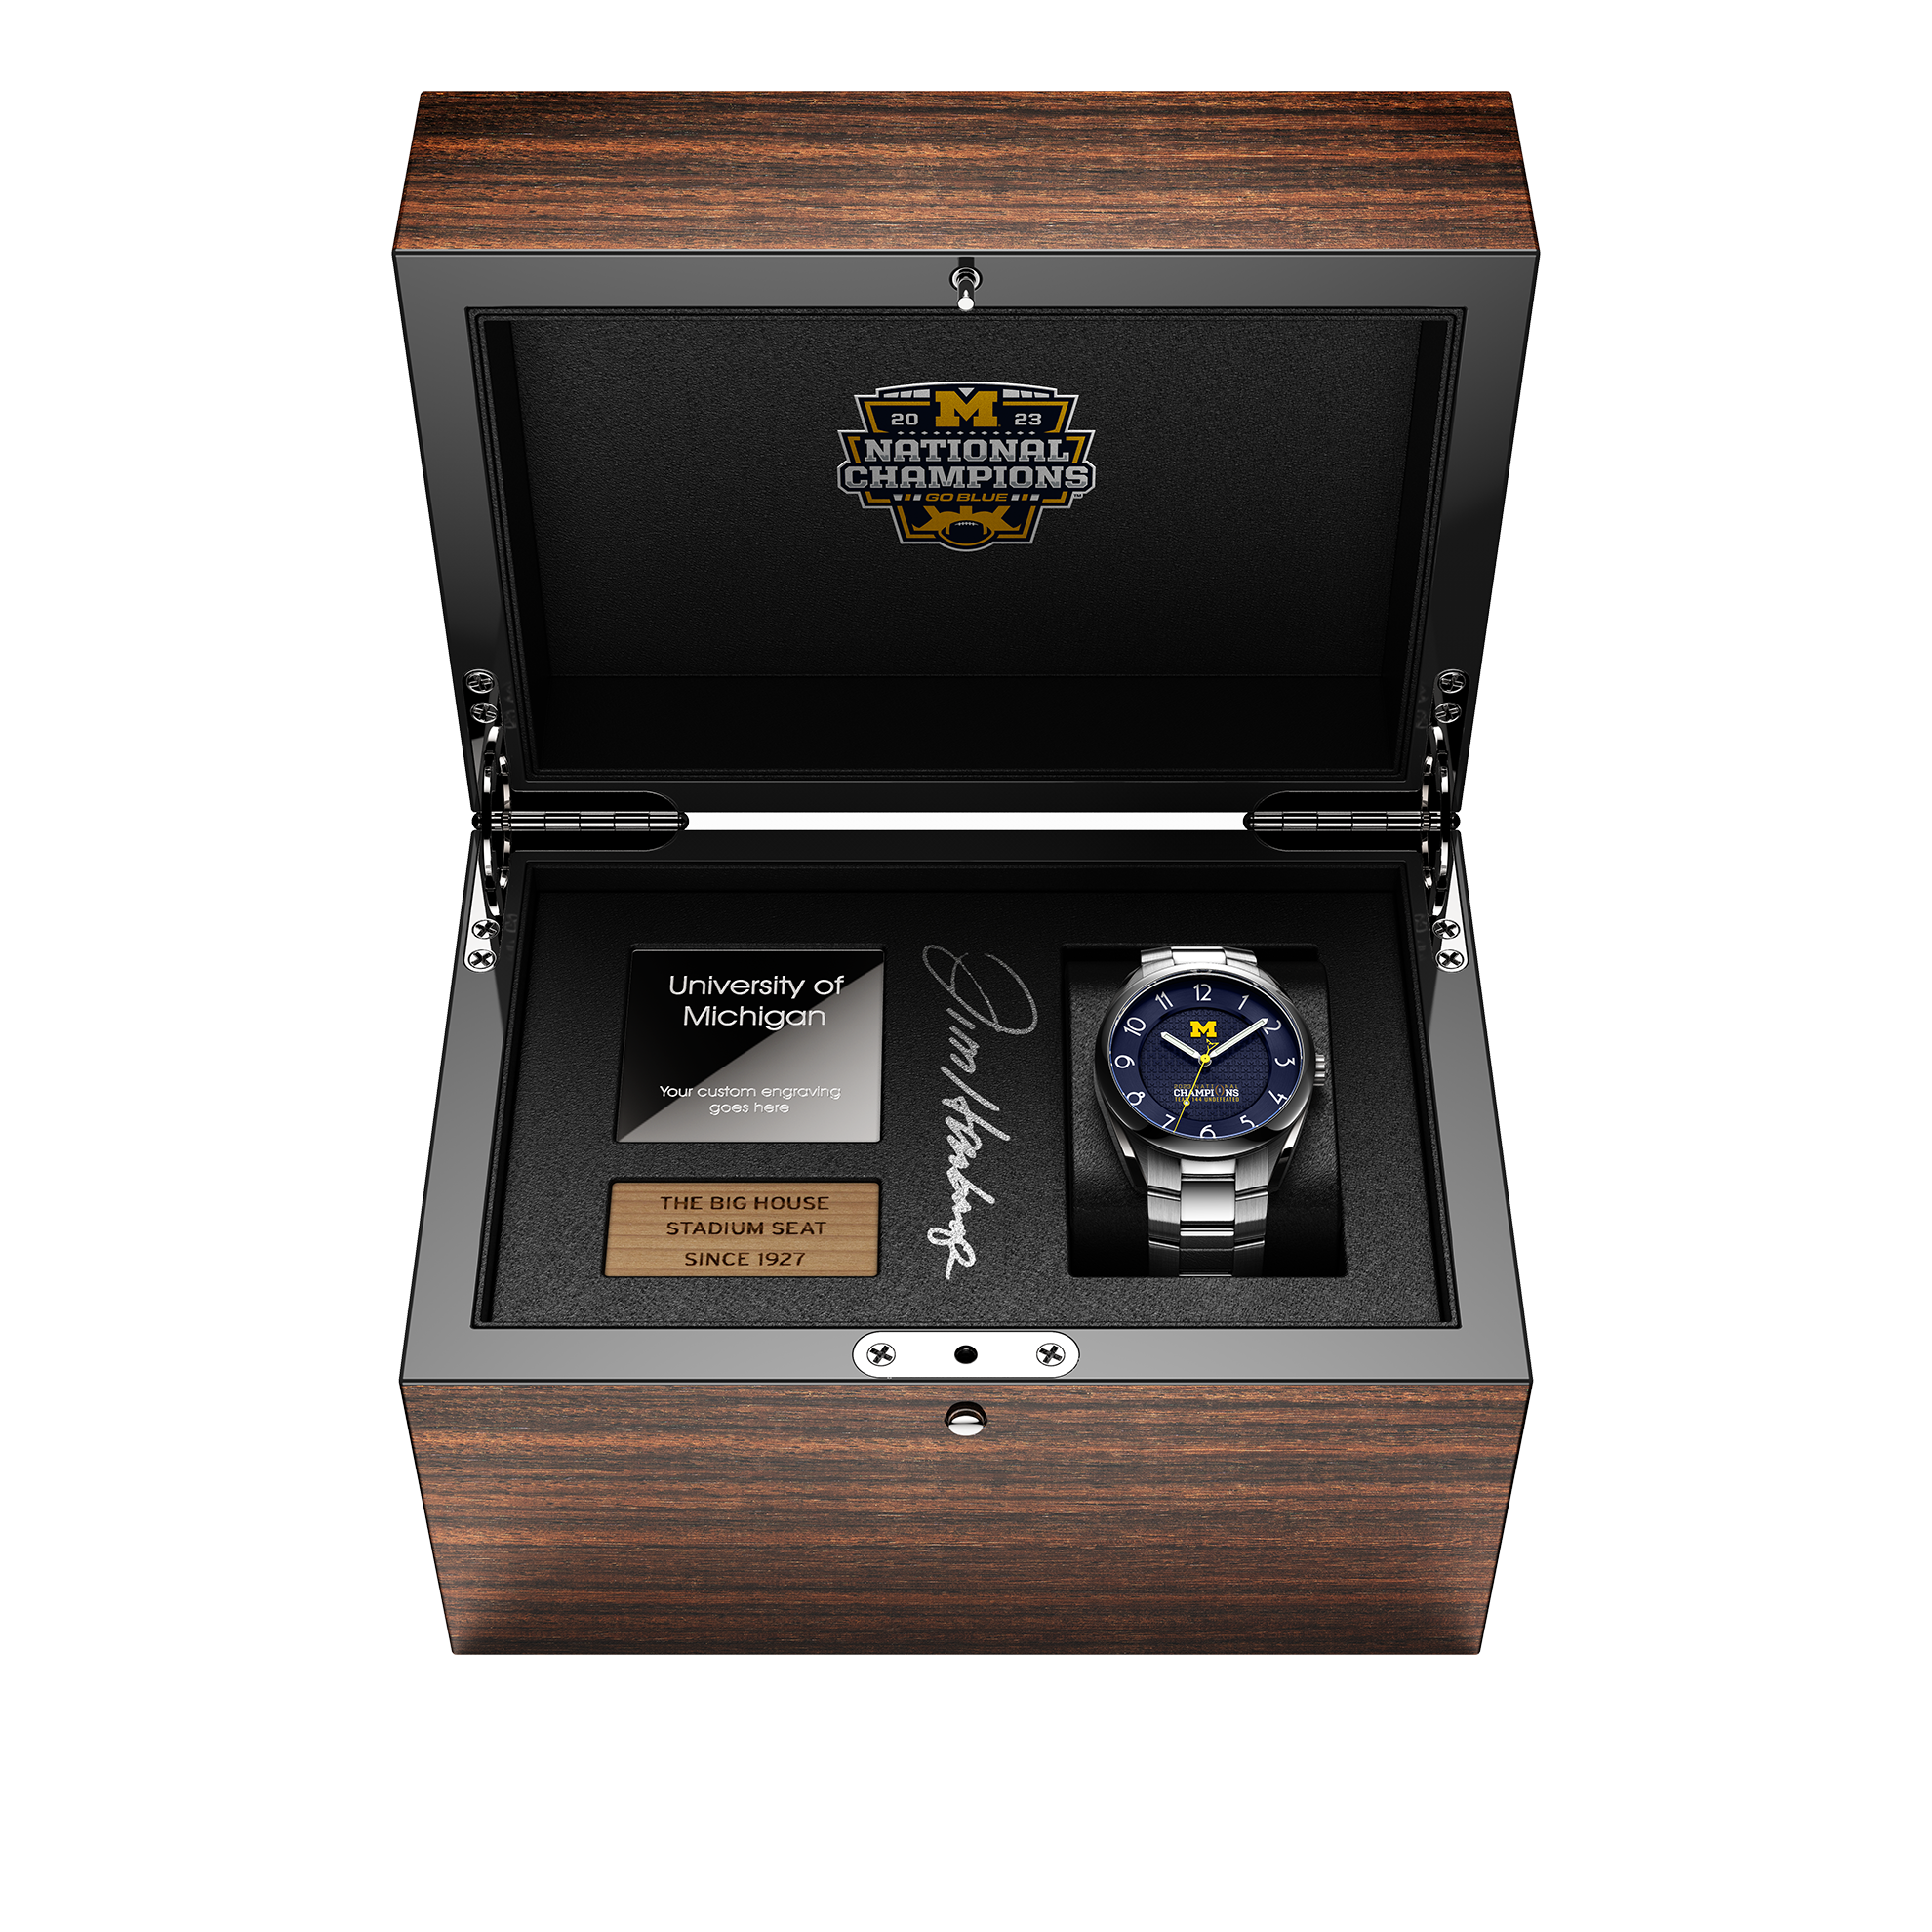 Jim Harbaugh signed autographed display box with a piece of the big house and Michigan 2023 National Champions CFP 2024 winners swiss made automatic watch. Kairos II stainless steel.